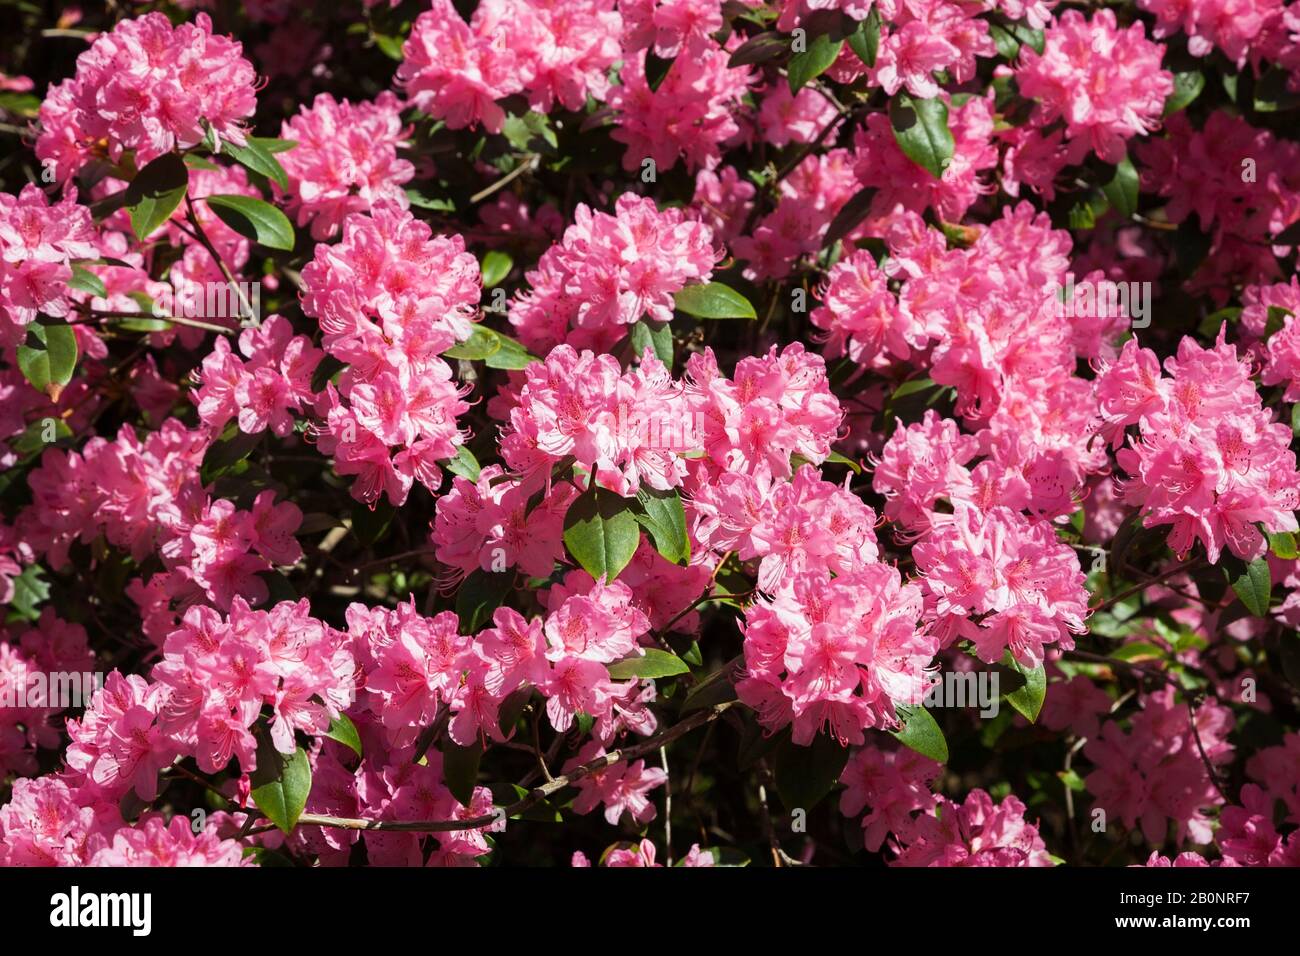 Close-up of pink flowering Rhododendron - Azalea shrub in spring. Stock Photo